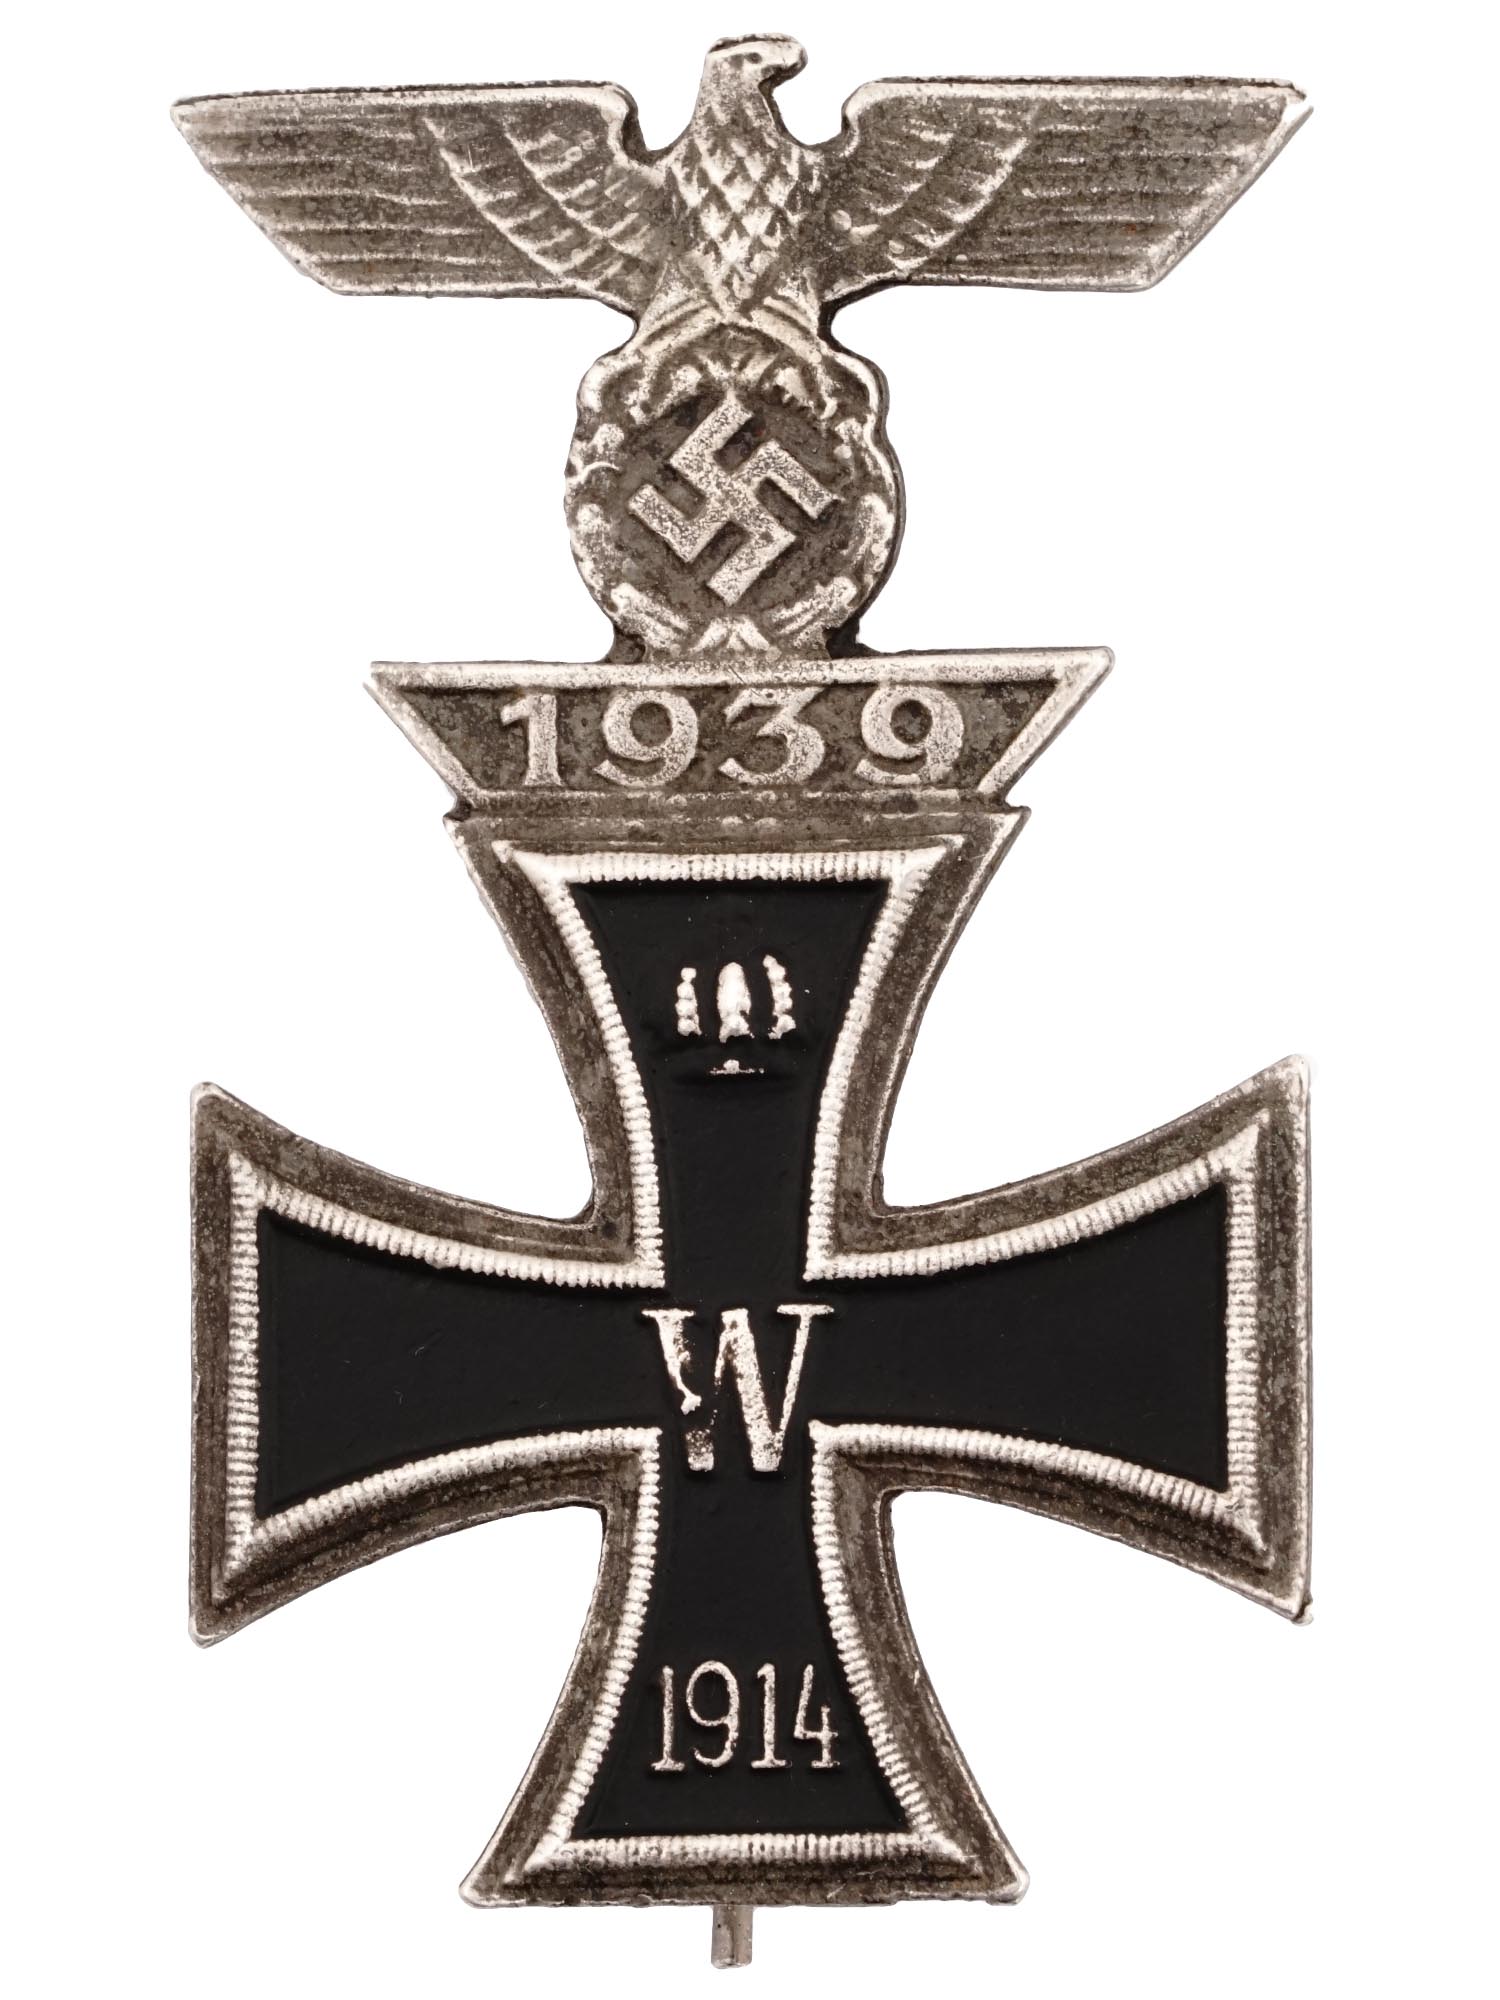 WWII NAZI GERMAN THIRD REICH BADGE AND IRON CROSS PIC-2